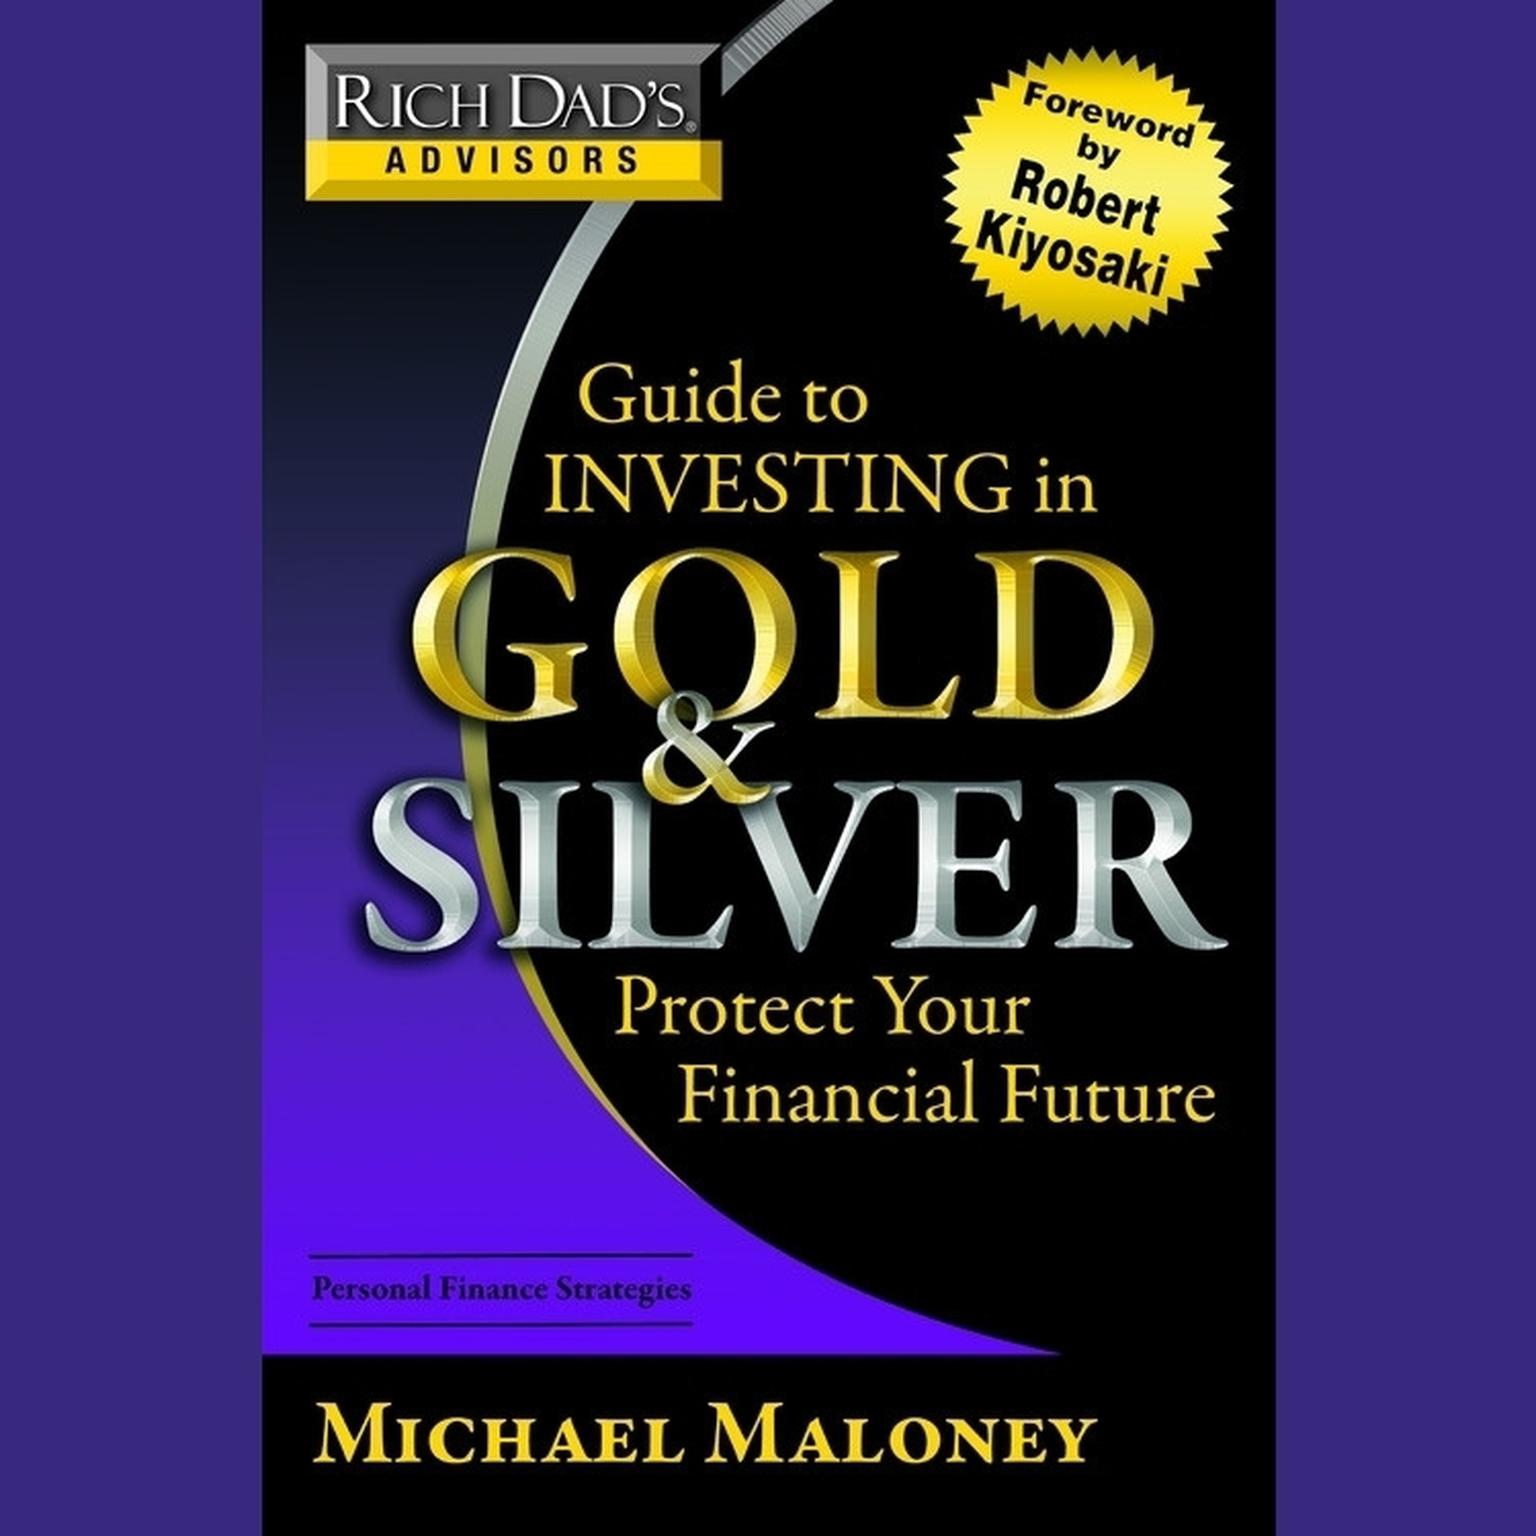 Rich Dads Advisors: Guide to Investing In Gold and Silver (Abridged): Everything You Need to Know to Profit from Precious Metals Now Audiobook, by Michael Maloney